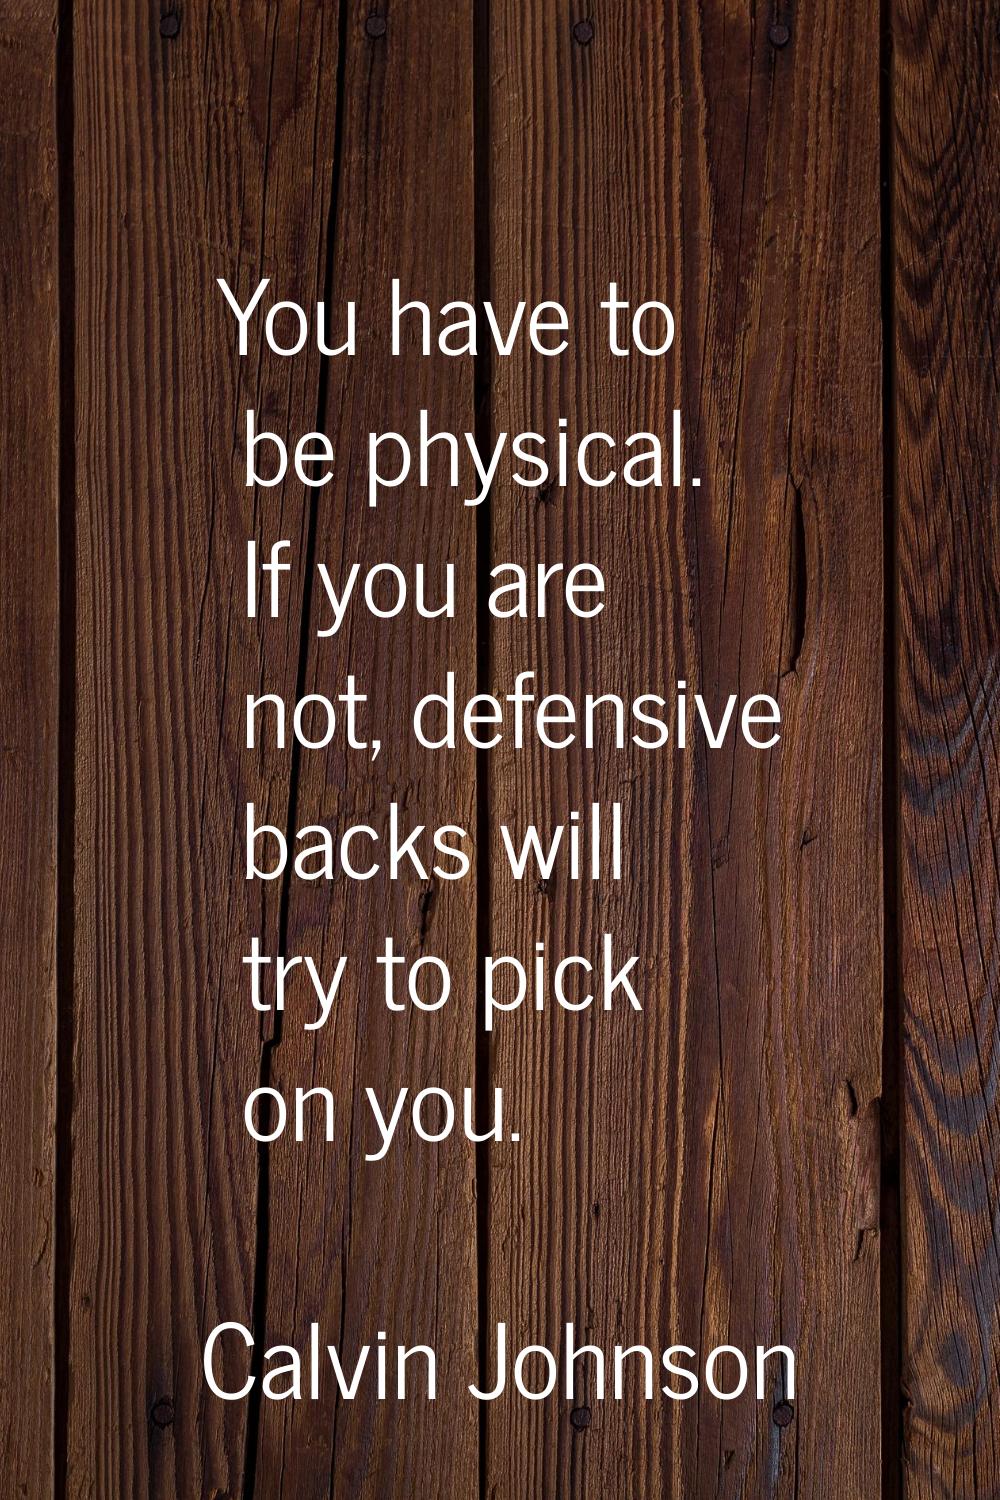 You have to be physical. If you are not, defensive backs will try to pick on you.